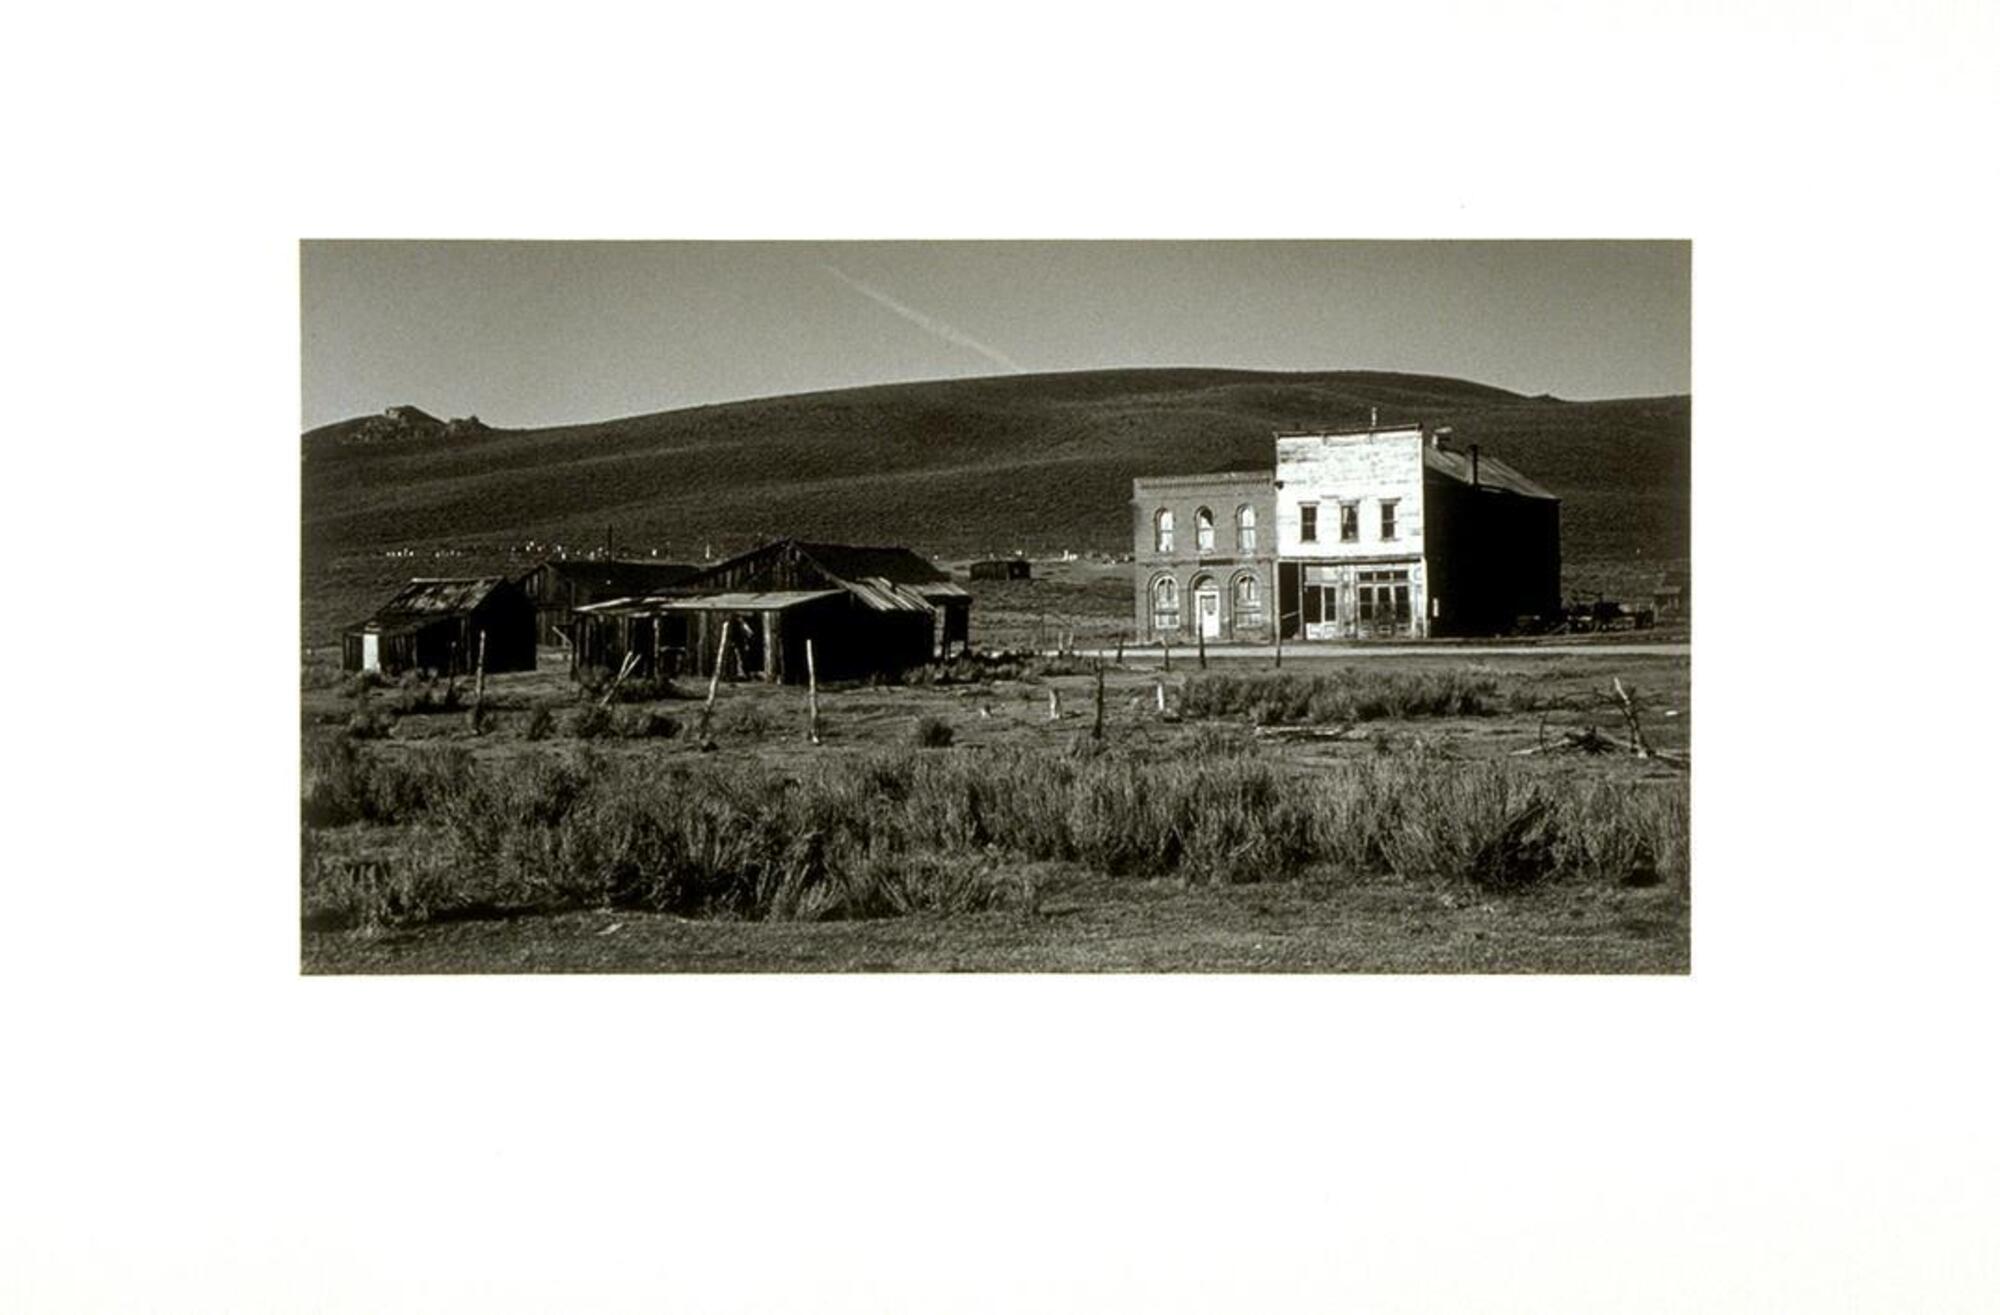 Photograph of shacks and abandoned houses in a landscape.